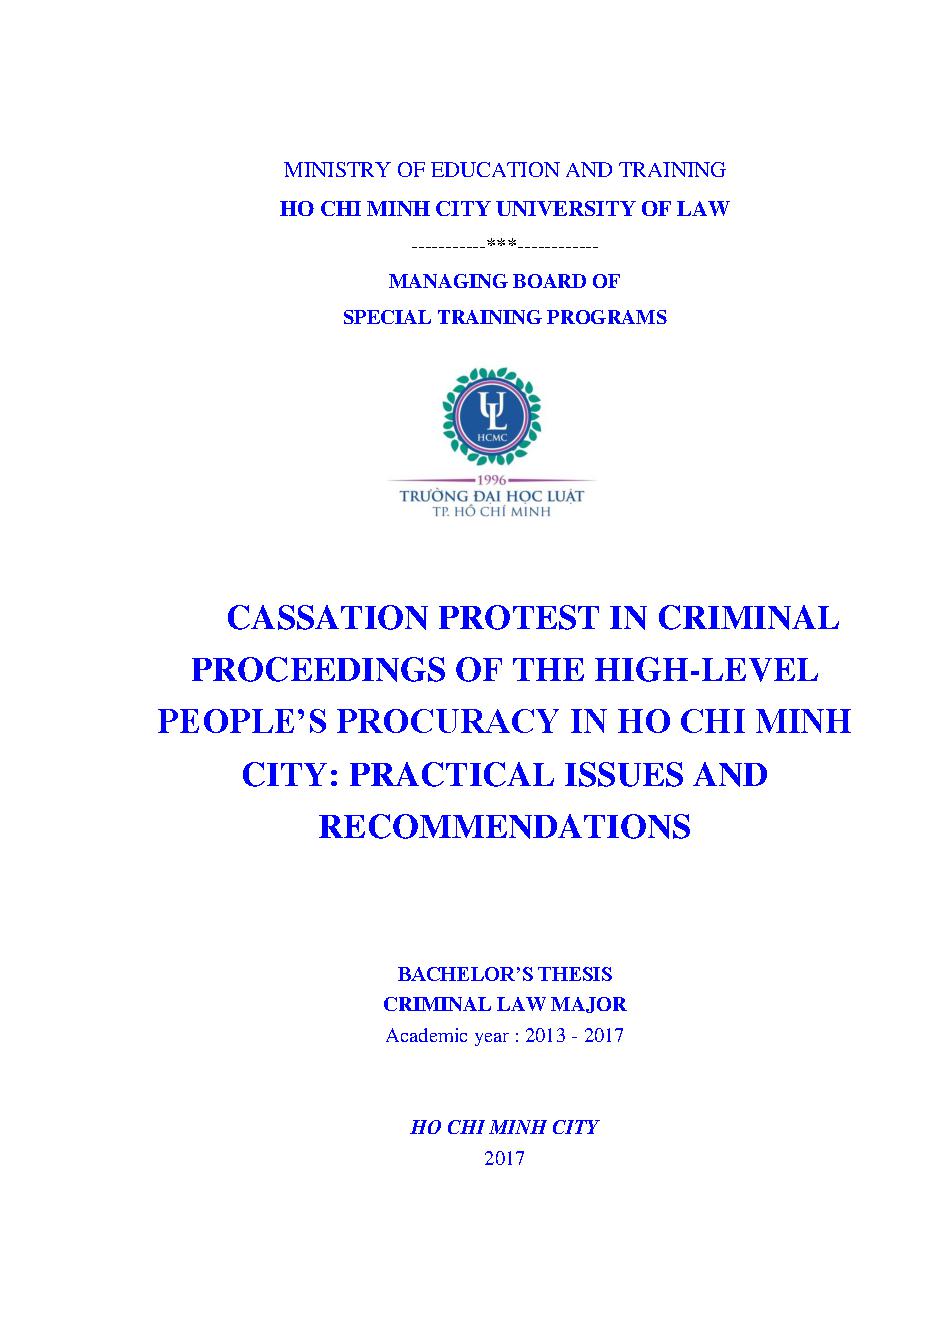 Cassation protest in criminal proceedings of the hight - level people's procuracy in Ho Chi Minh city: Practical issues and recommendations